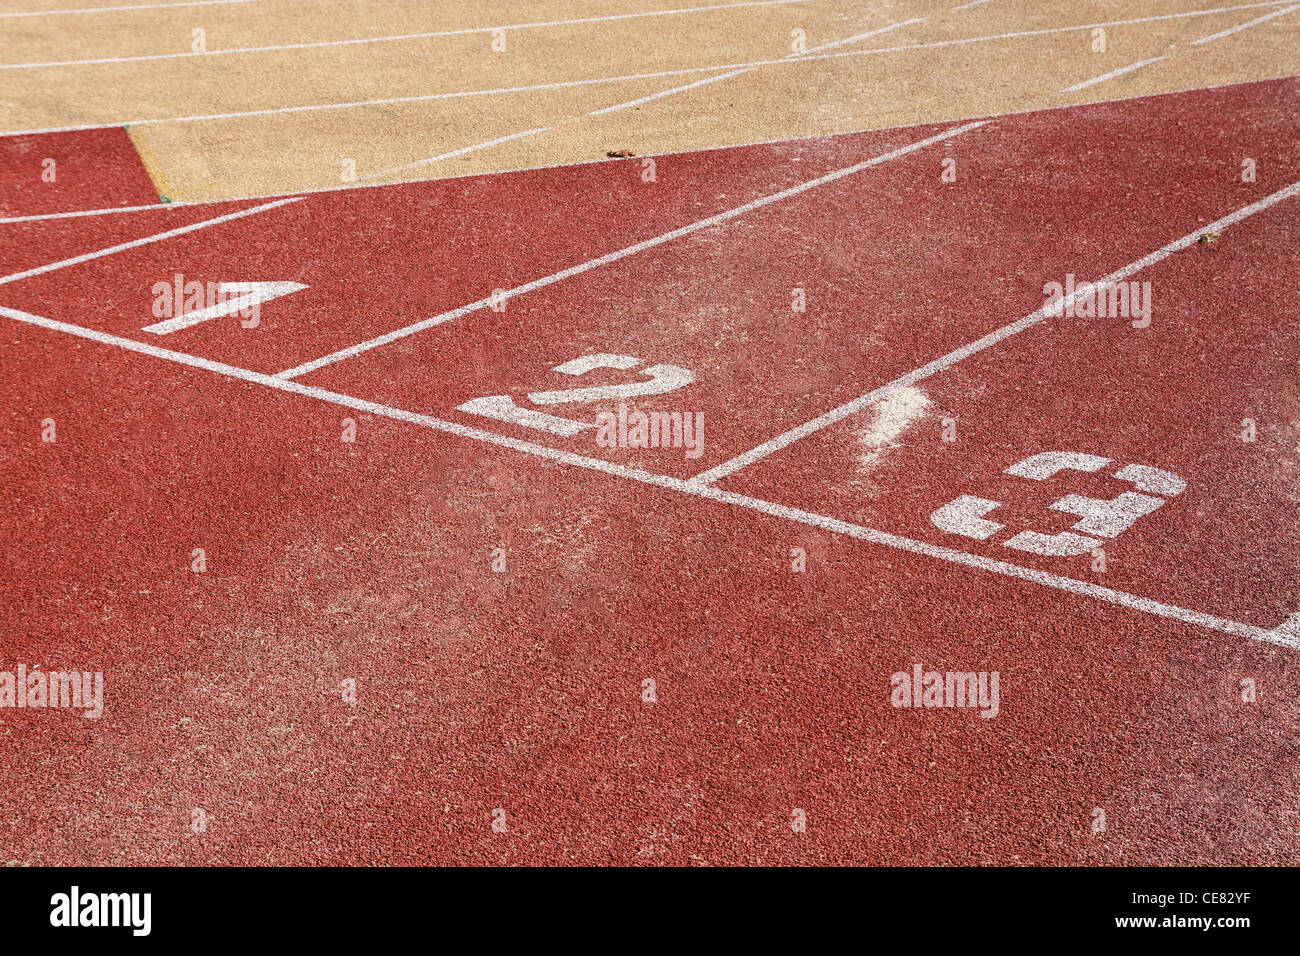 Running track lines with starting numbers Stock Photo